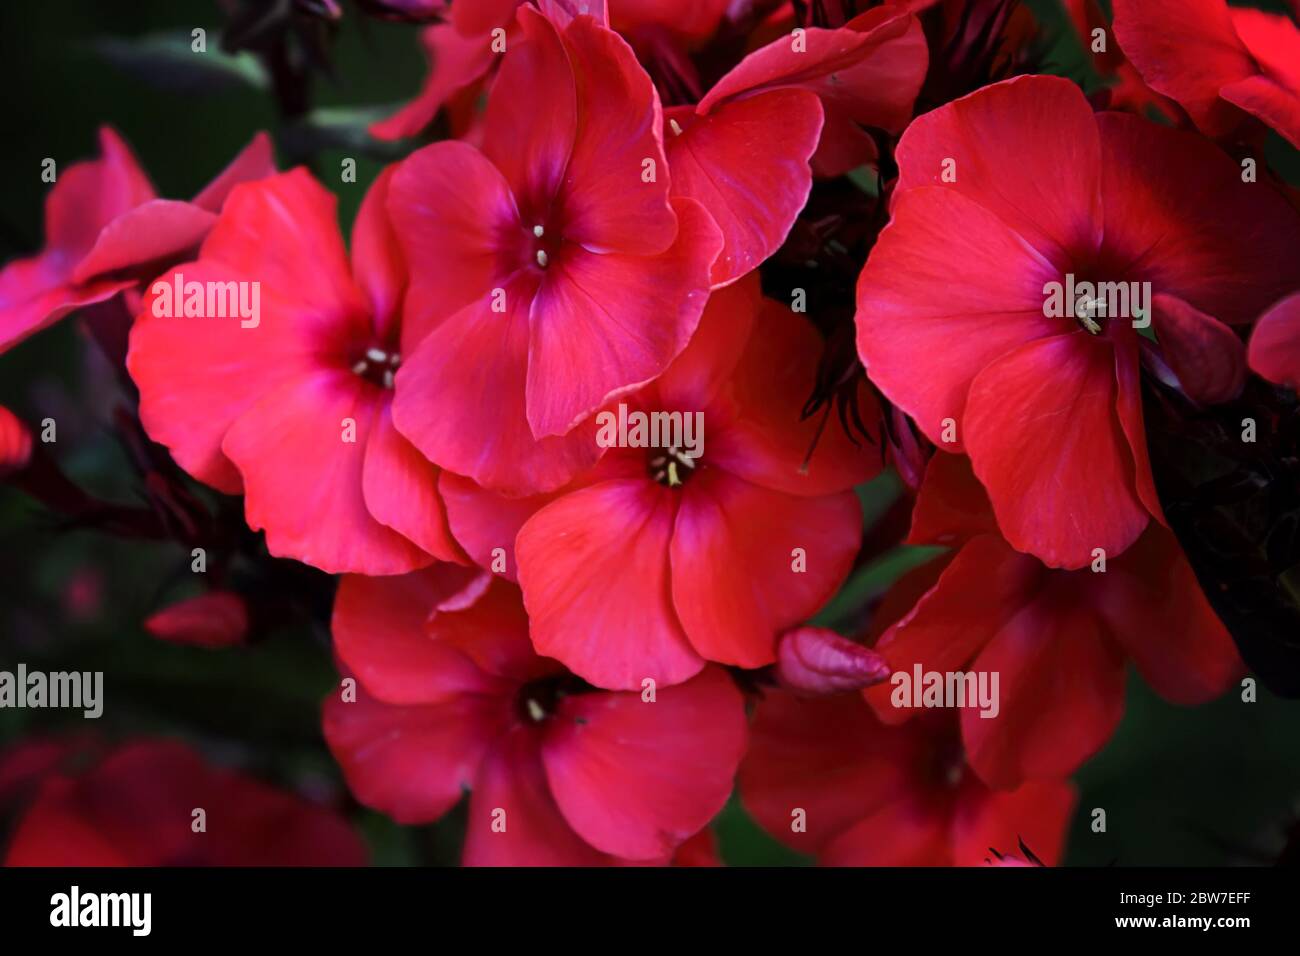 Large clusters of pink Garden Phlox flowering plant on brown background with leaves. Pink phlox flowers in the garden. It is theme of seasons. A close Stock Photo